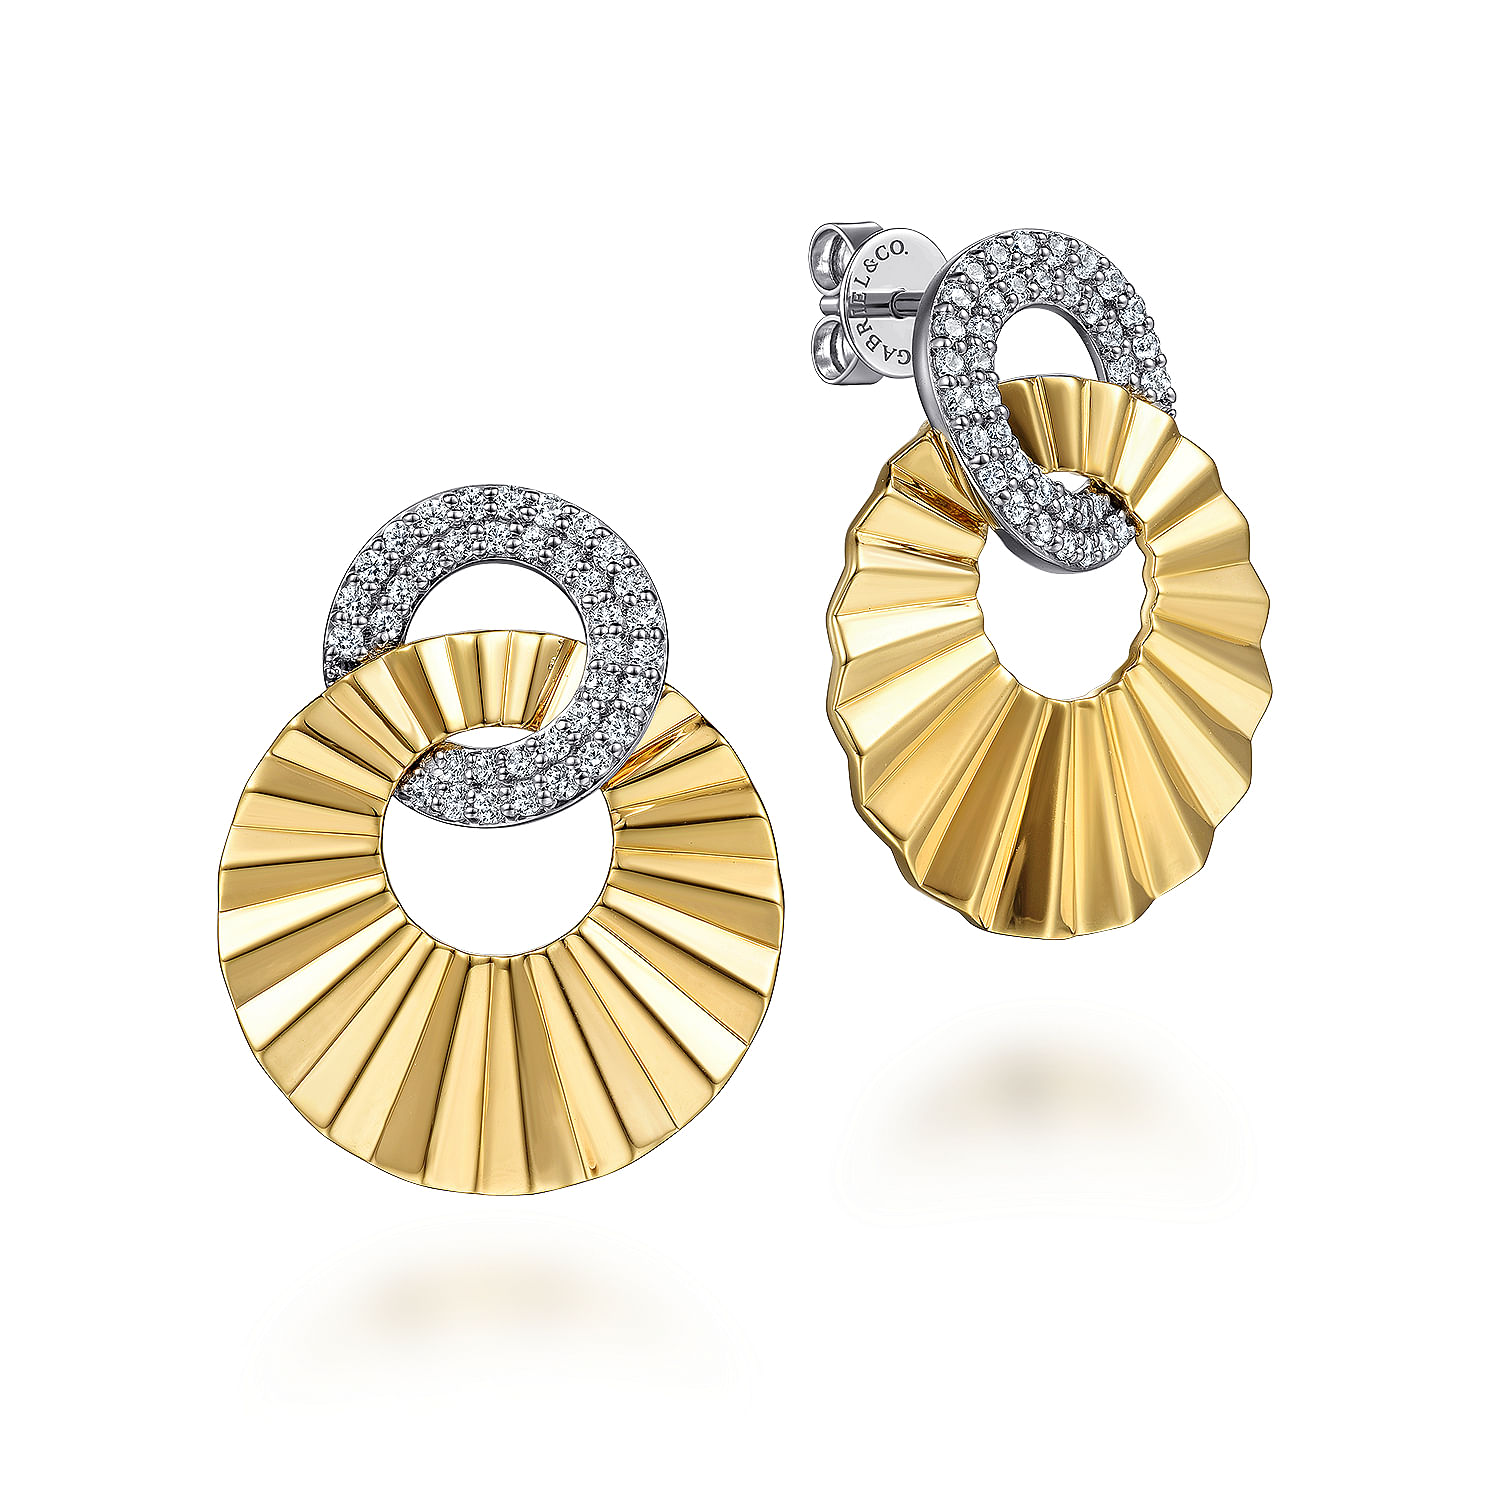 14K White and Yellow Gold Double Round Disk Earrings Stud With Diamond Cut Texture